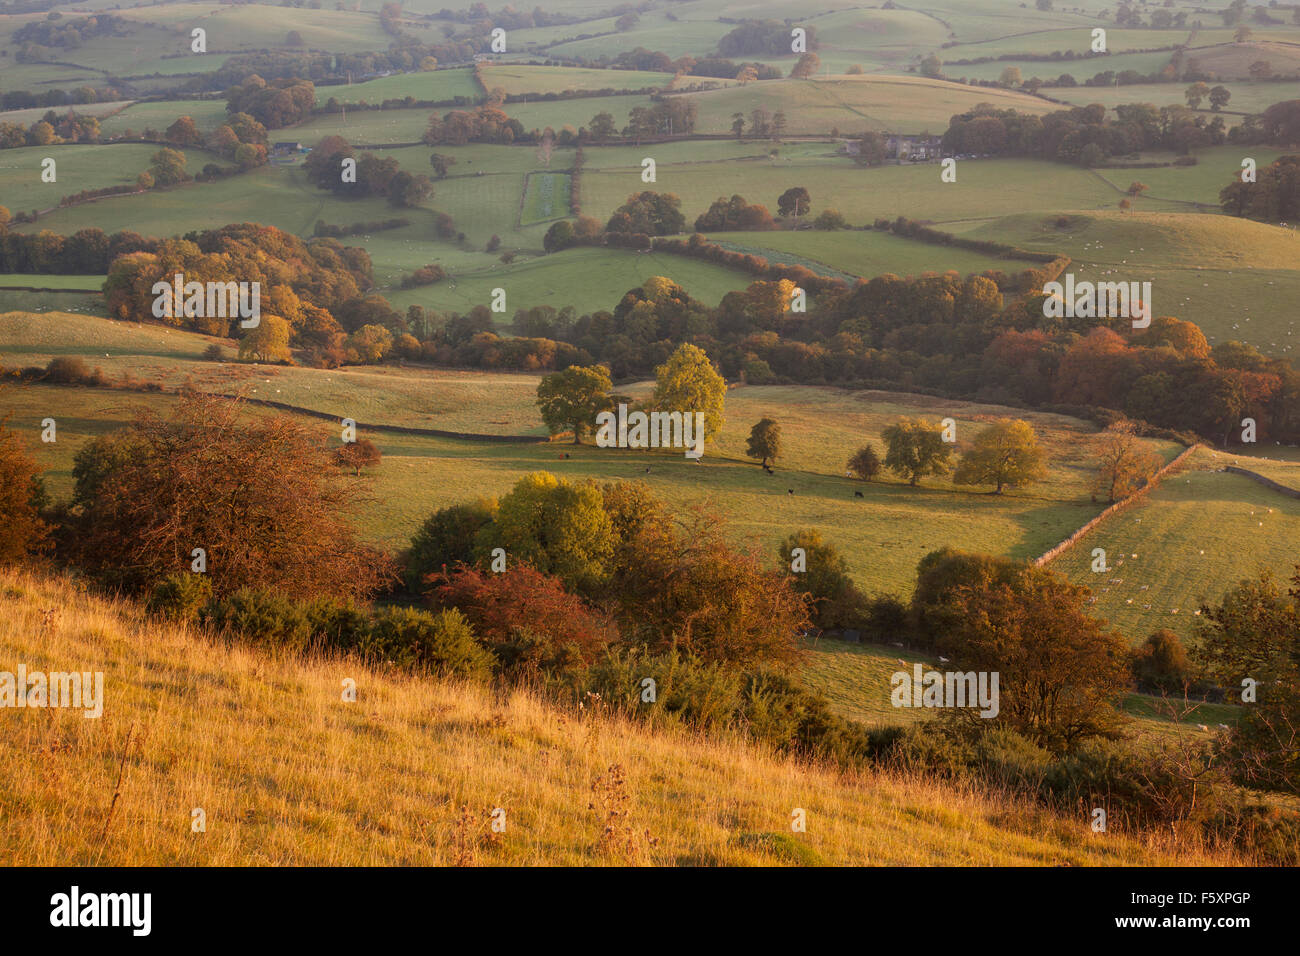 The rolling hills and countryside of Burton In Lonsdale, from above the village of Newbiggin, Burton in Lonsdale, Cumbria, UK Stock Photo